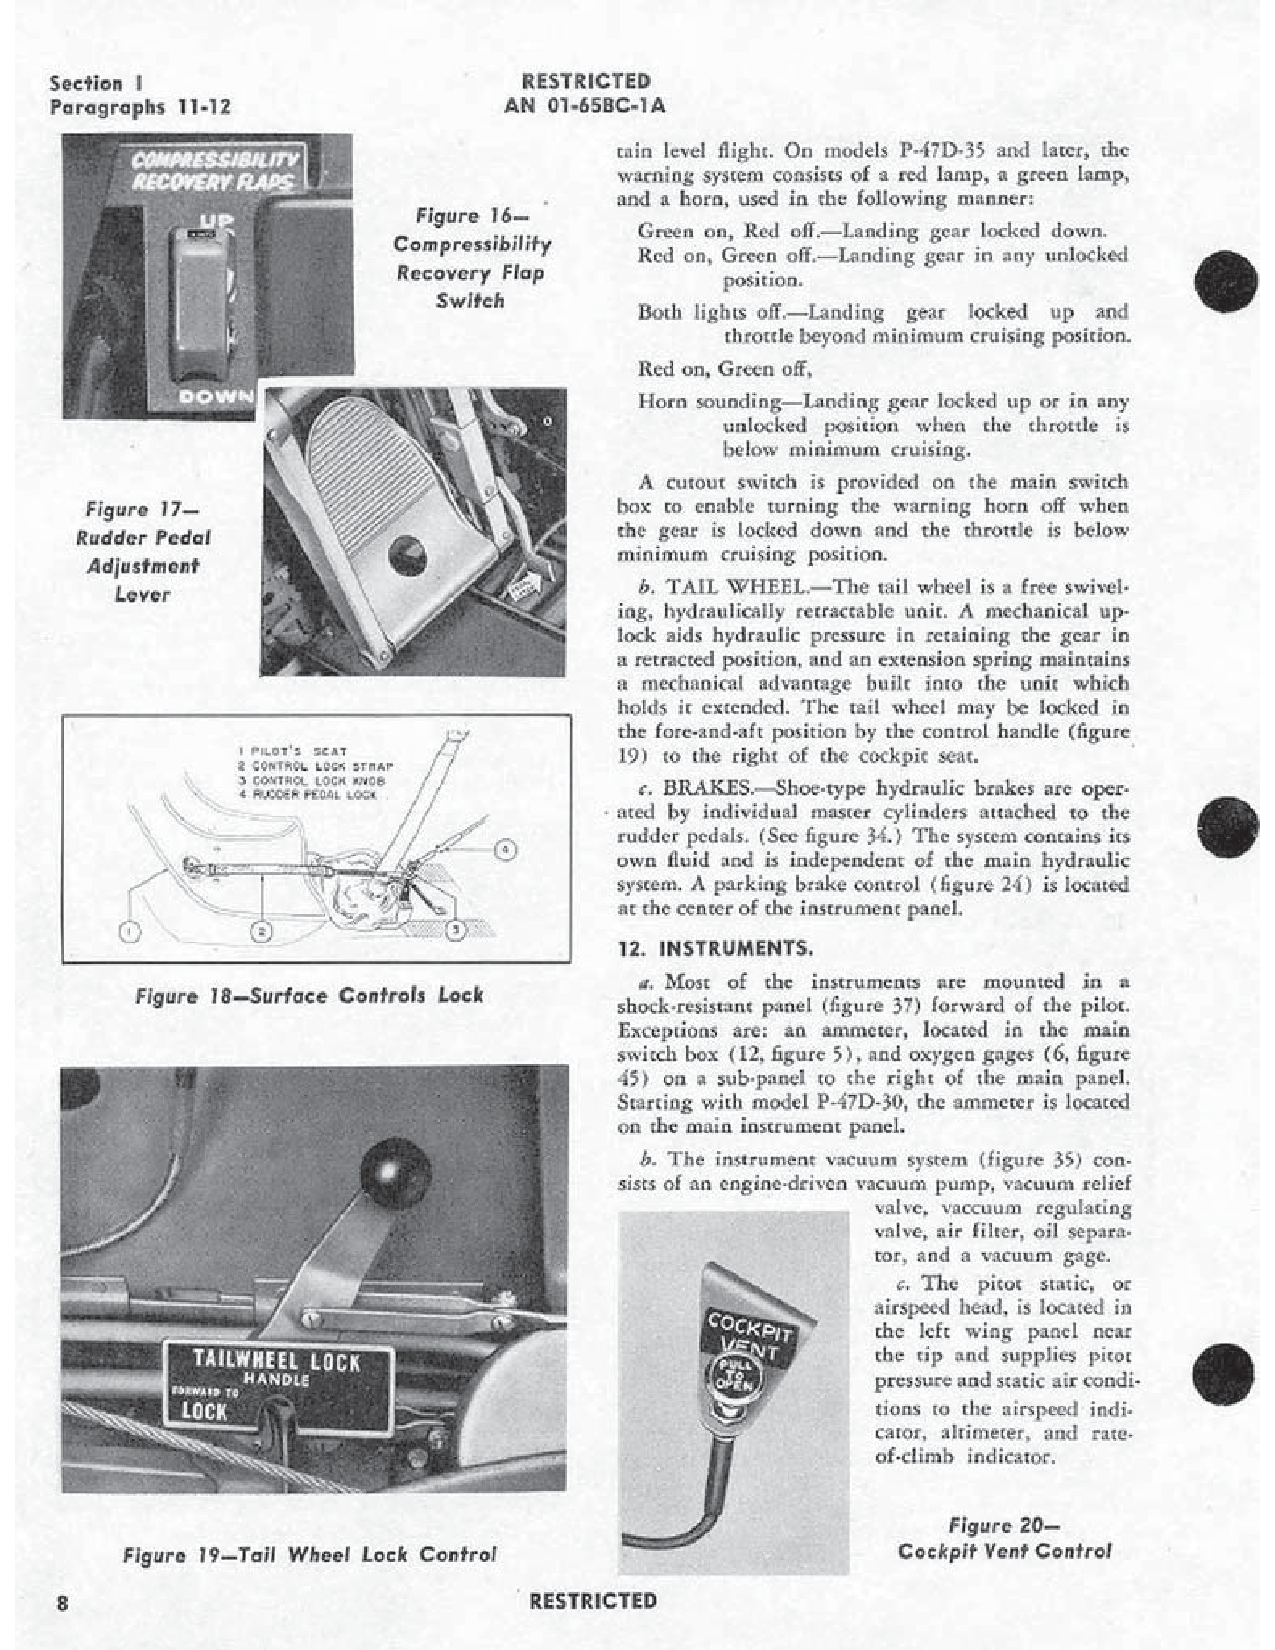 Sample page 12 from AirCorps Library document: Pilot's Flight Operating Instructions - P-47D